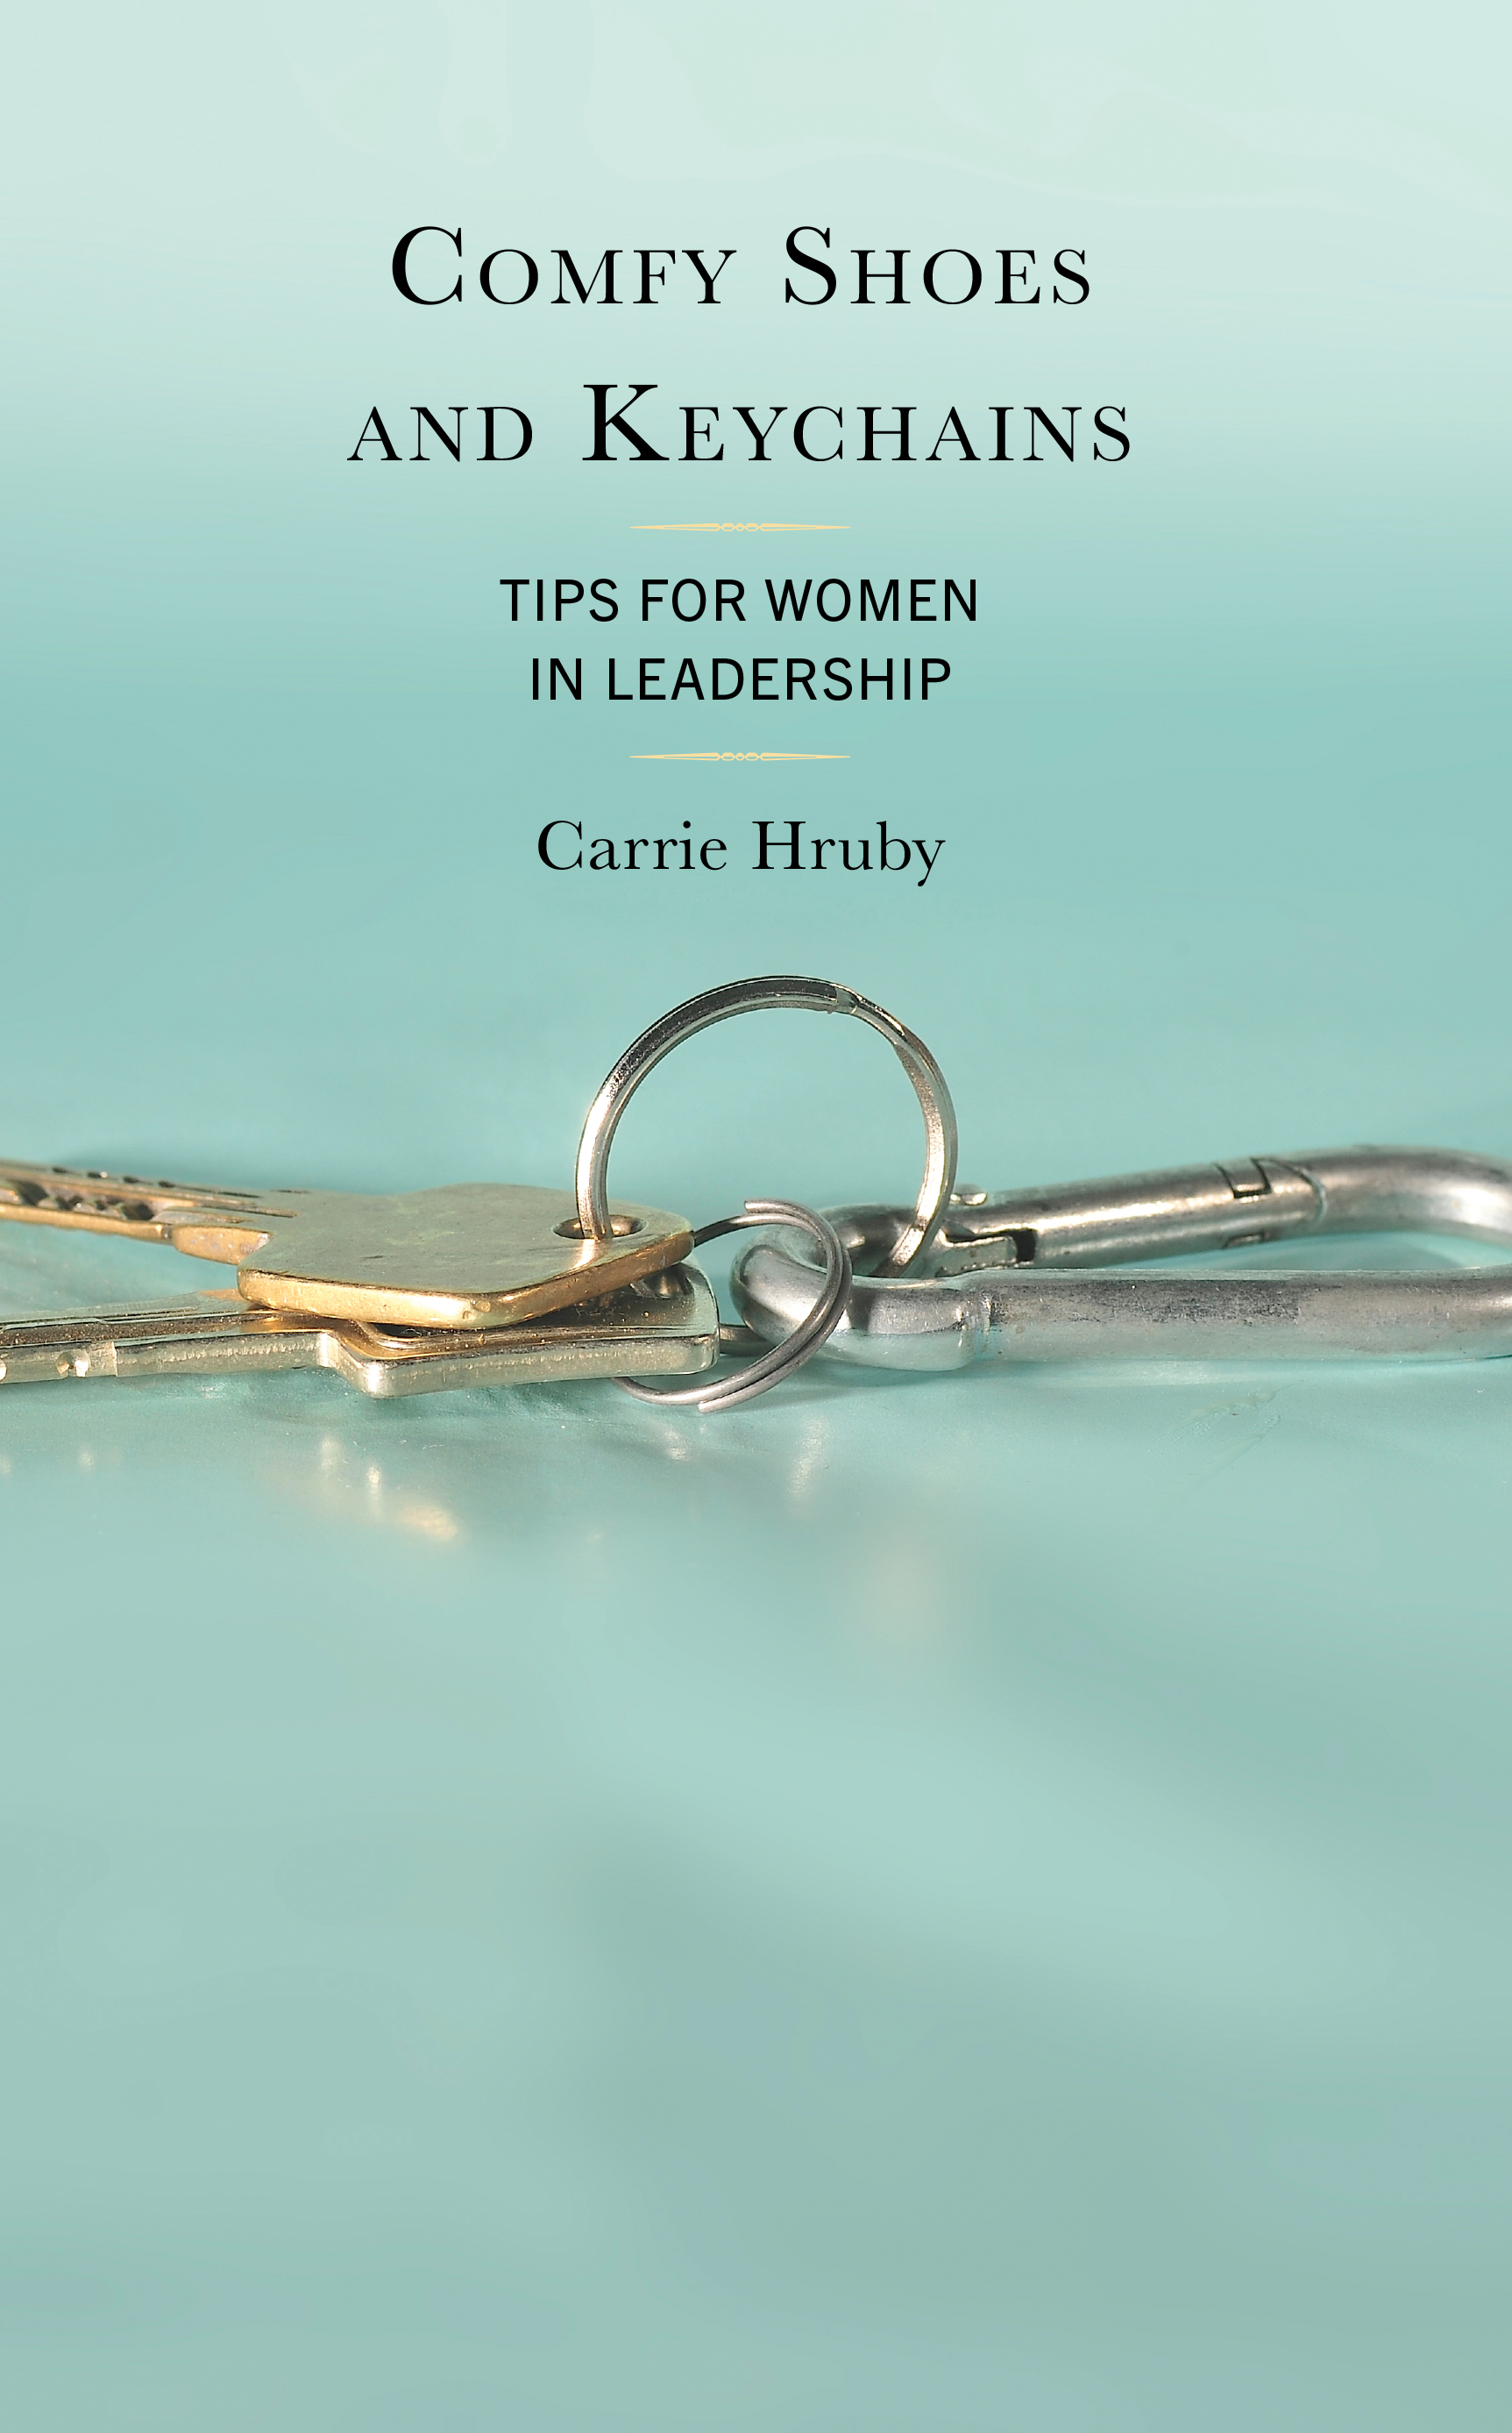 Comfy Shoes and Keychains: Tips for Women in Leadership